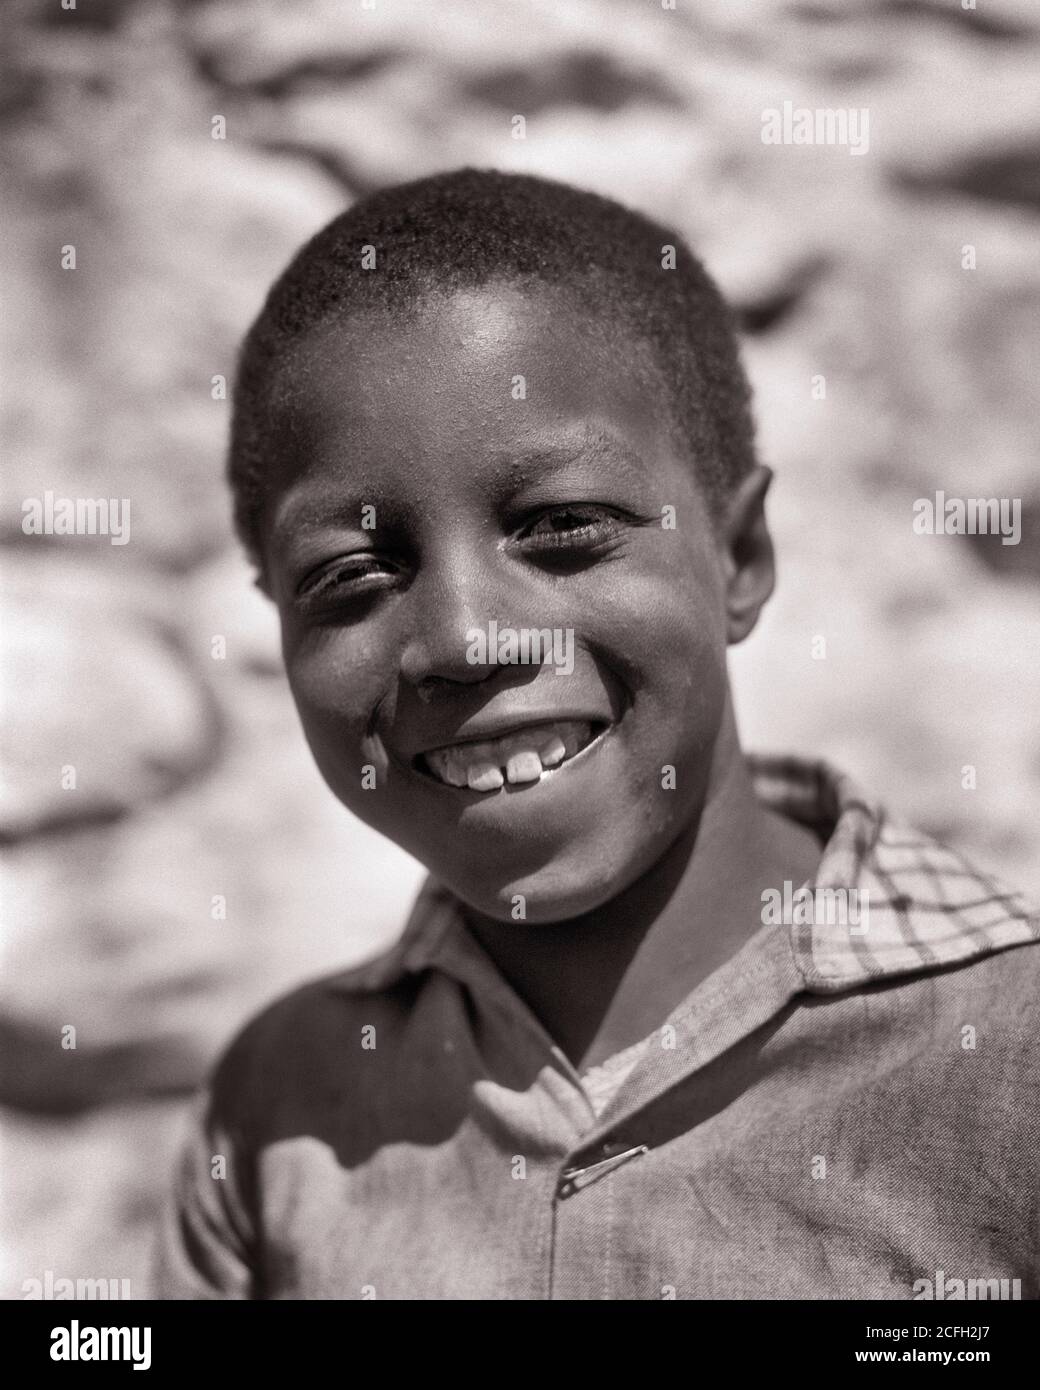 1930s AFRICAN-AMERICAN BOY LOOKING AT CAMERA GREAT DEPRESSION ERA PORTRAIT - n940 HAR001 HARS NORTH AMERICA EYE CONTACT NORTH AMERICAN DREAMS HAPPINESS WELLNESS HEAD AND SHOULDERS CHEERFUL AFRICAN-AMERICANS AFRICAN-AMERICAN BLACK ETHNICITY PRIDE SMILES SOUTHERN CONCEPTUAL JOYFUL SOUTHEASTERN DISADVANTAGED JUVENILES BLACK AND WHITE ERA HAR001 OLD FASHIONED AFRICAN AMERICANS Stock Photo